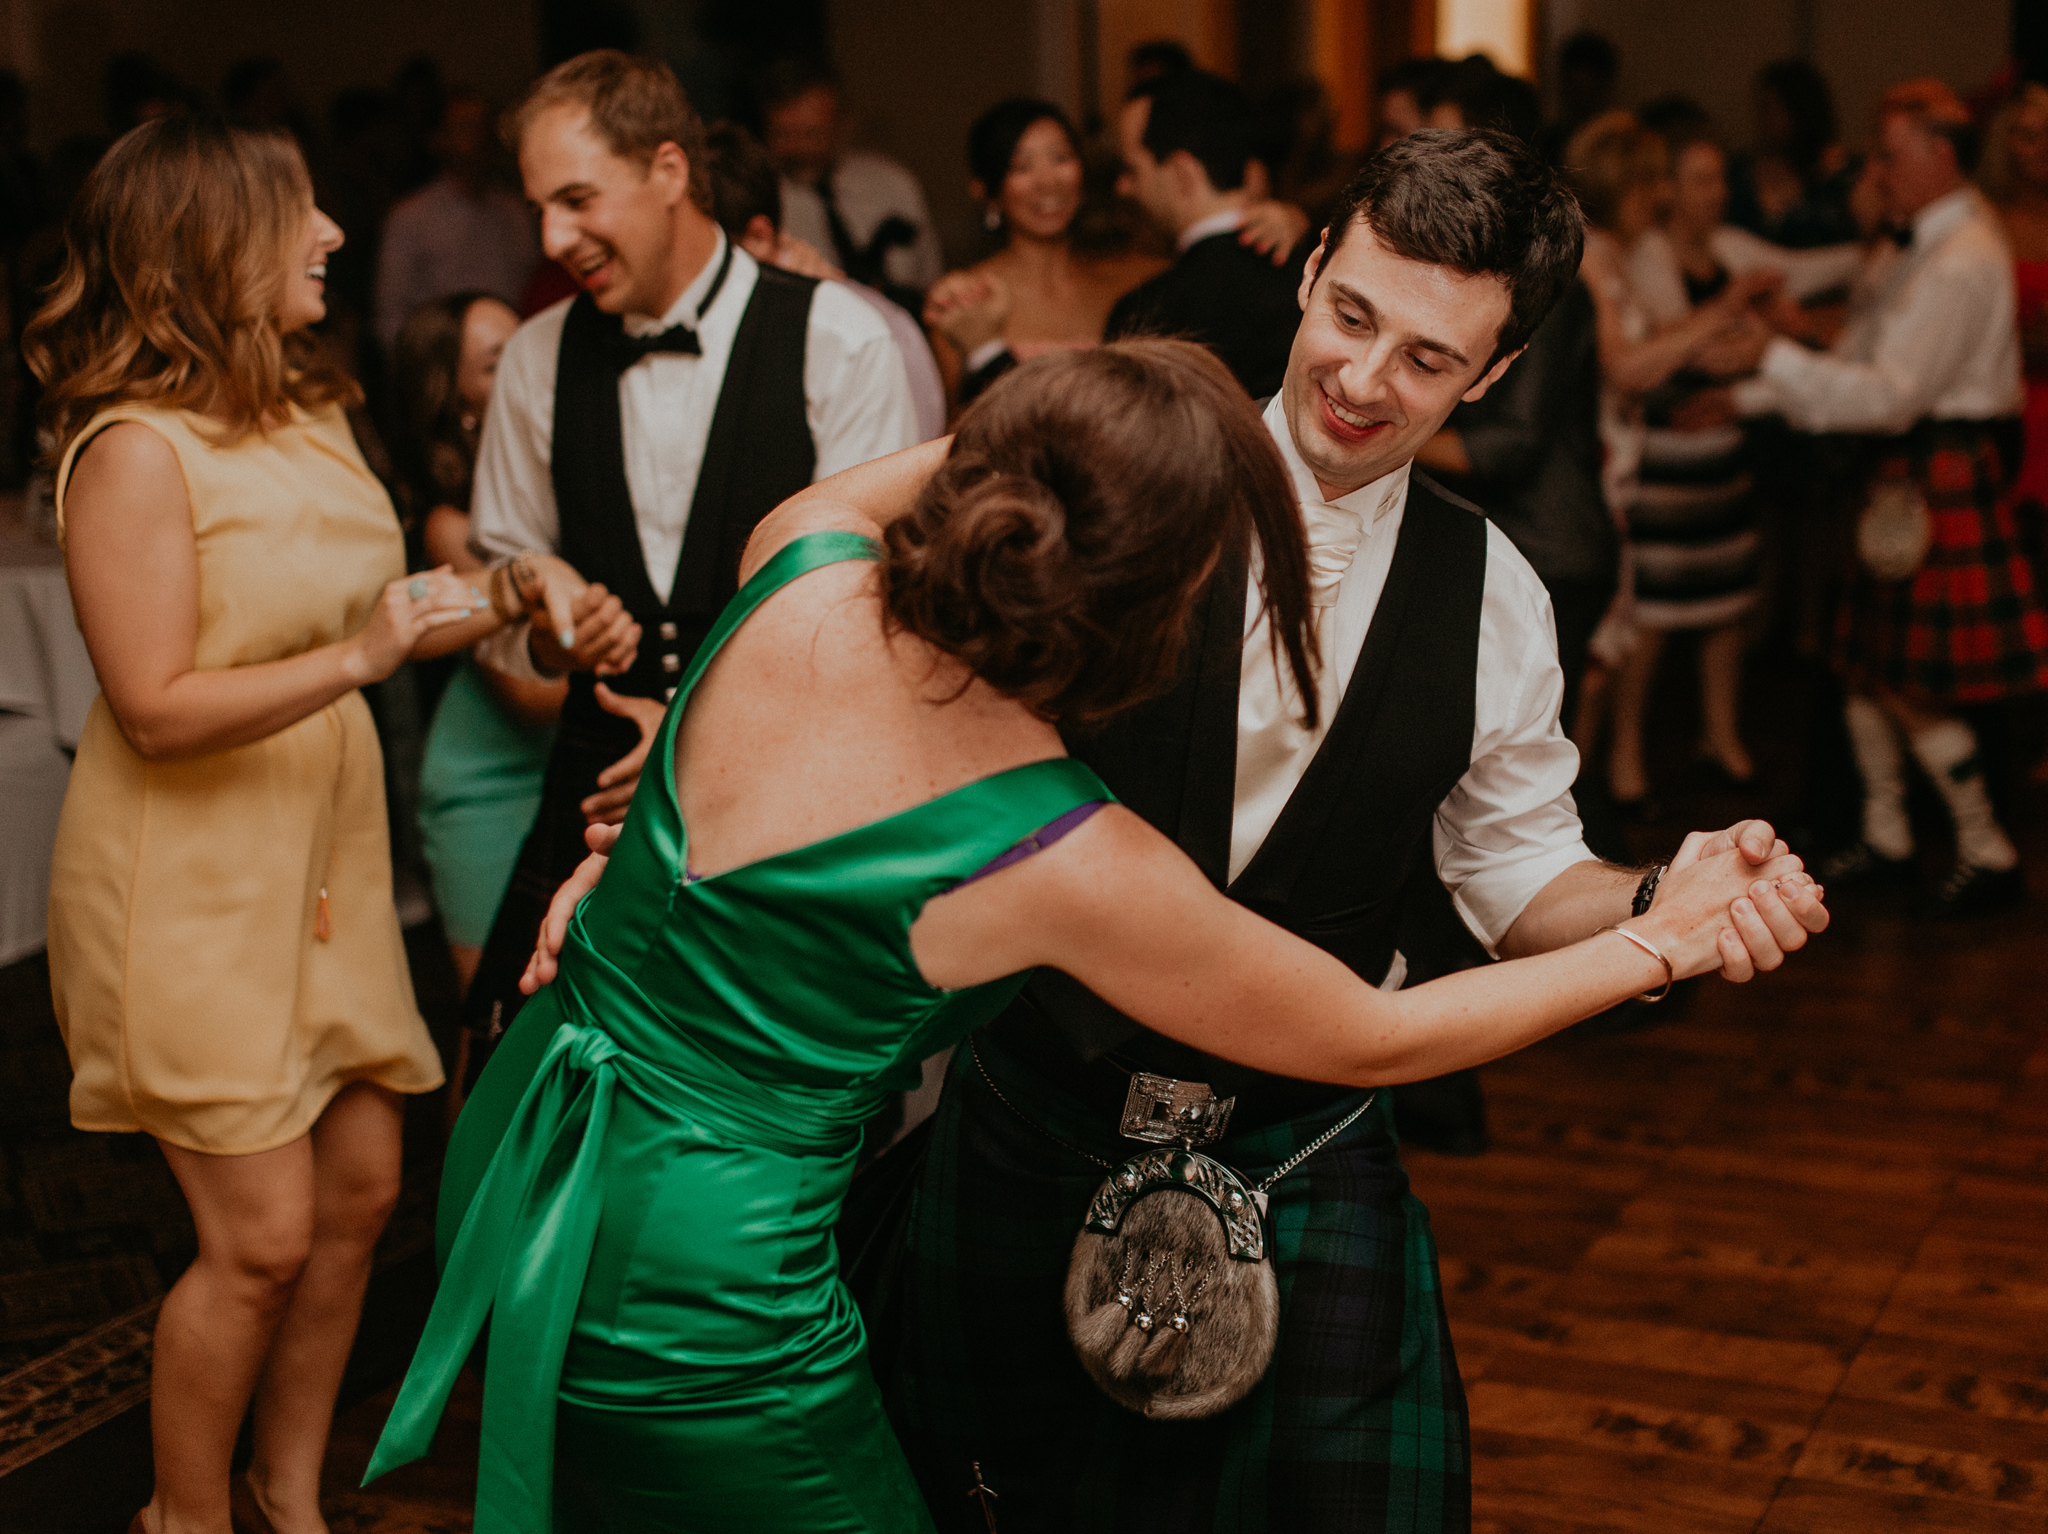 Groom dances with bridesmaid at wedding reception candid documentary photograph